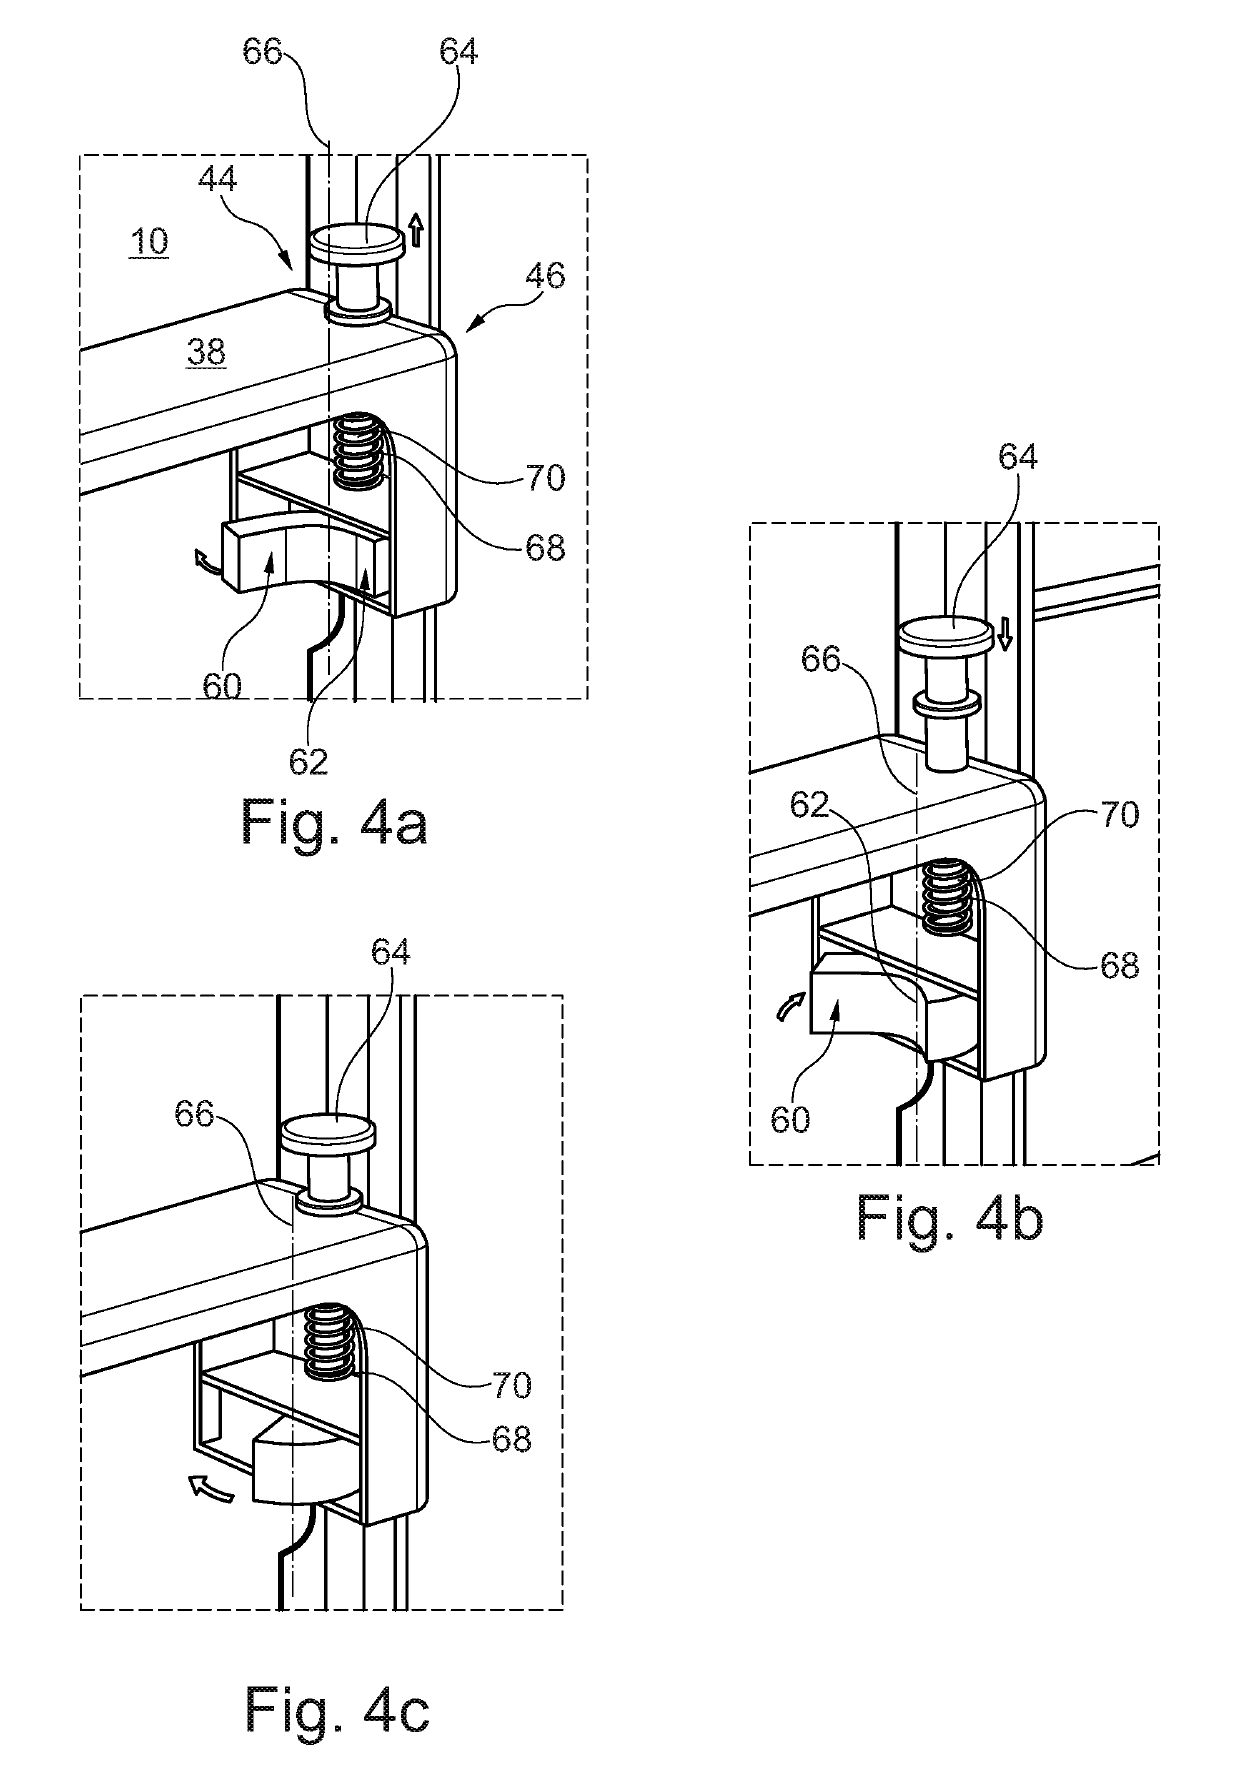 Arrangement for selectively arresting a serving trolley in a cabin of a transportation system